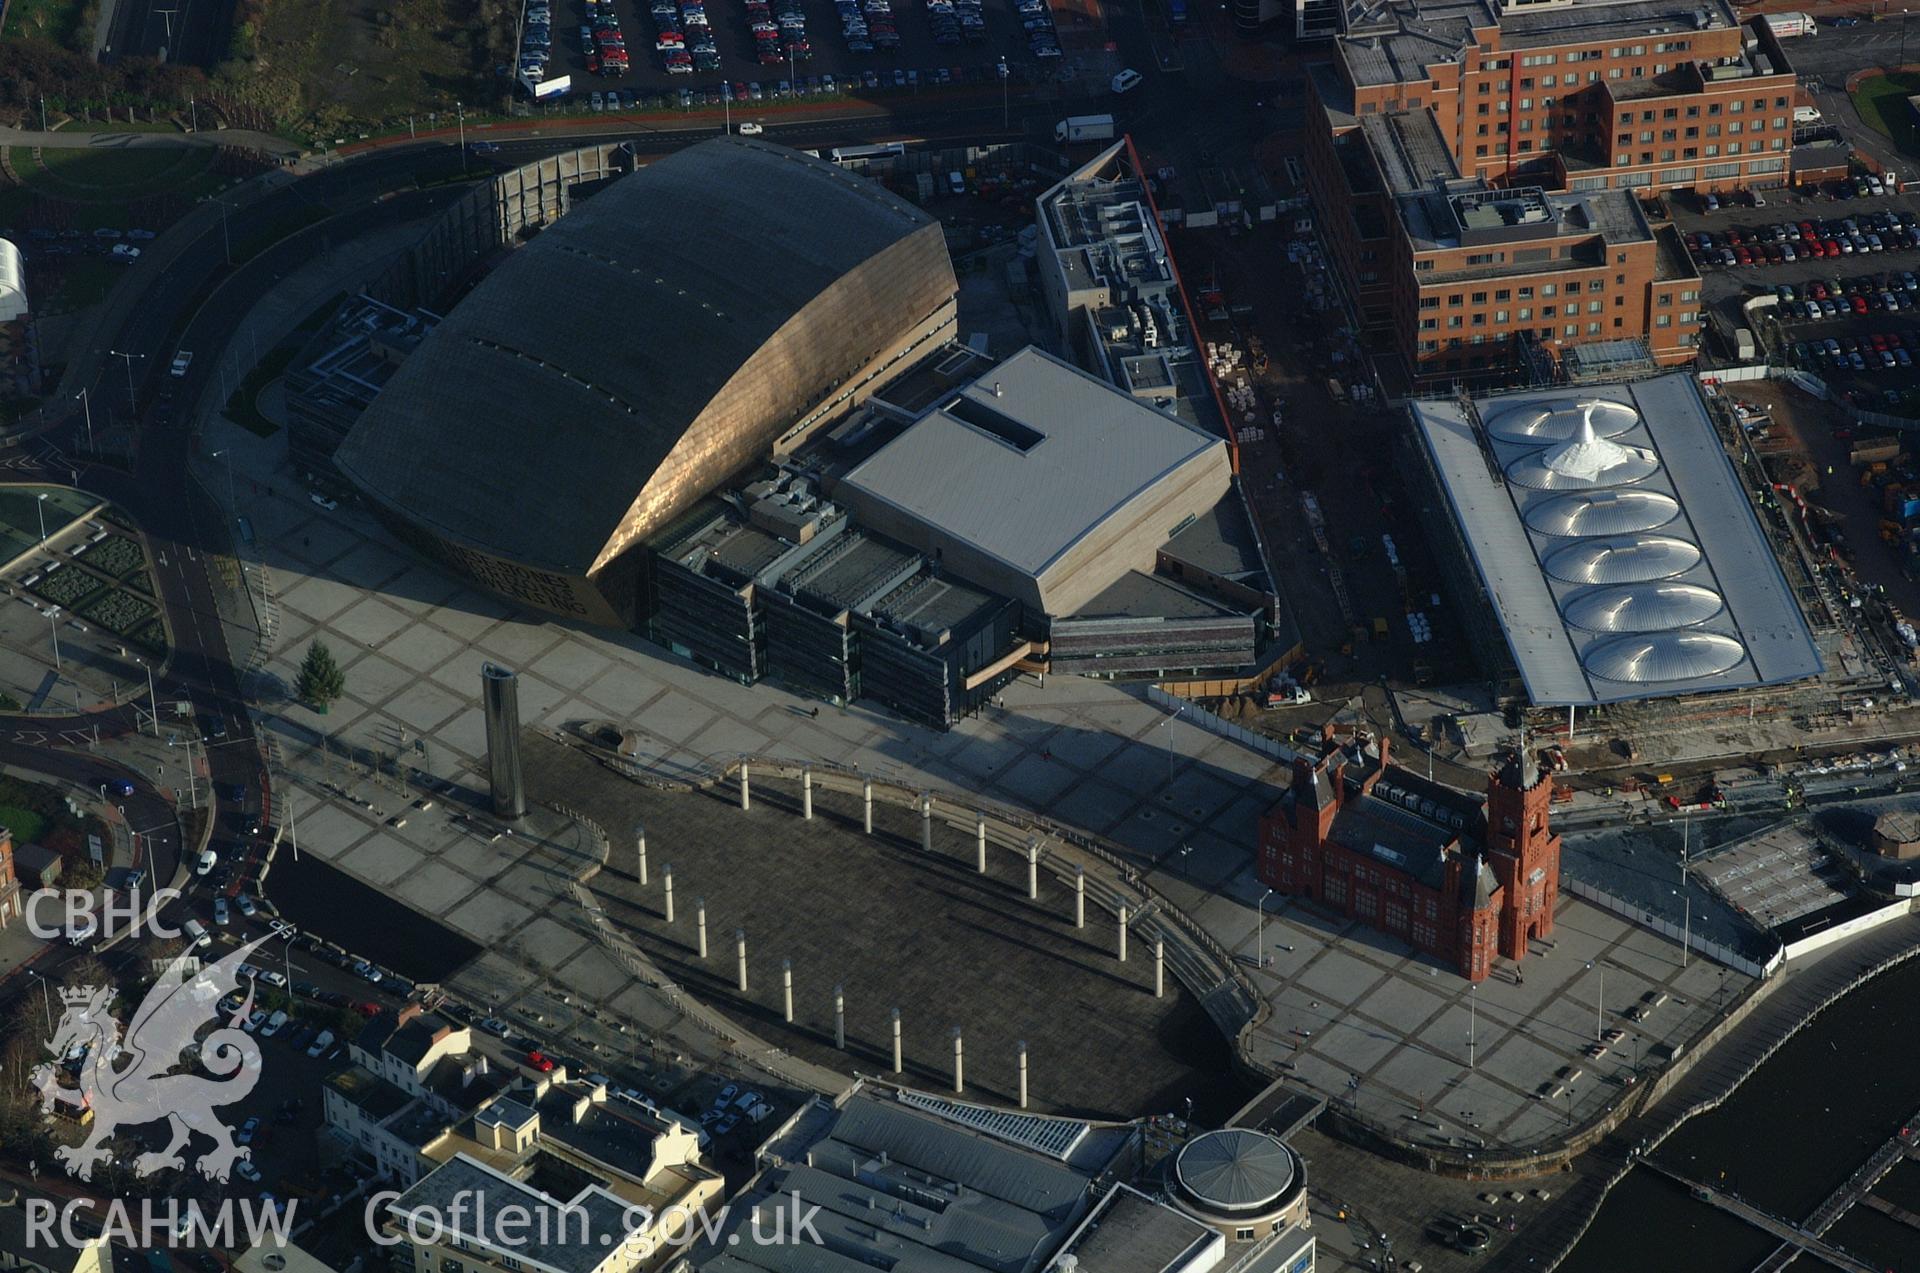 RCAHMW colour oblique aerial photograph of the Wales Millennium Centre taken on 13/01/2005 by Toby Driver